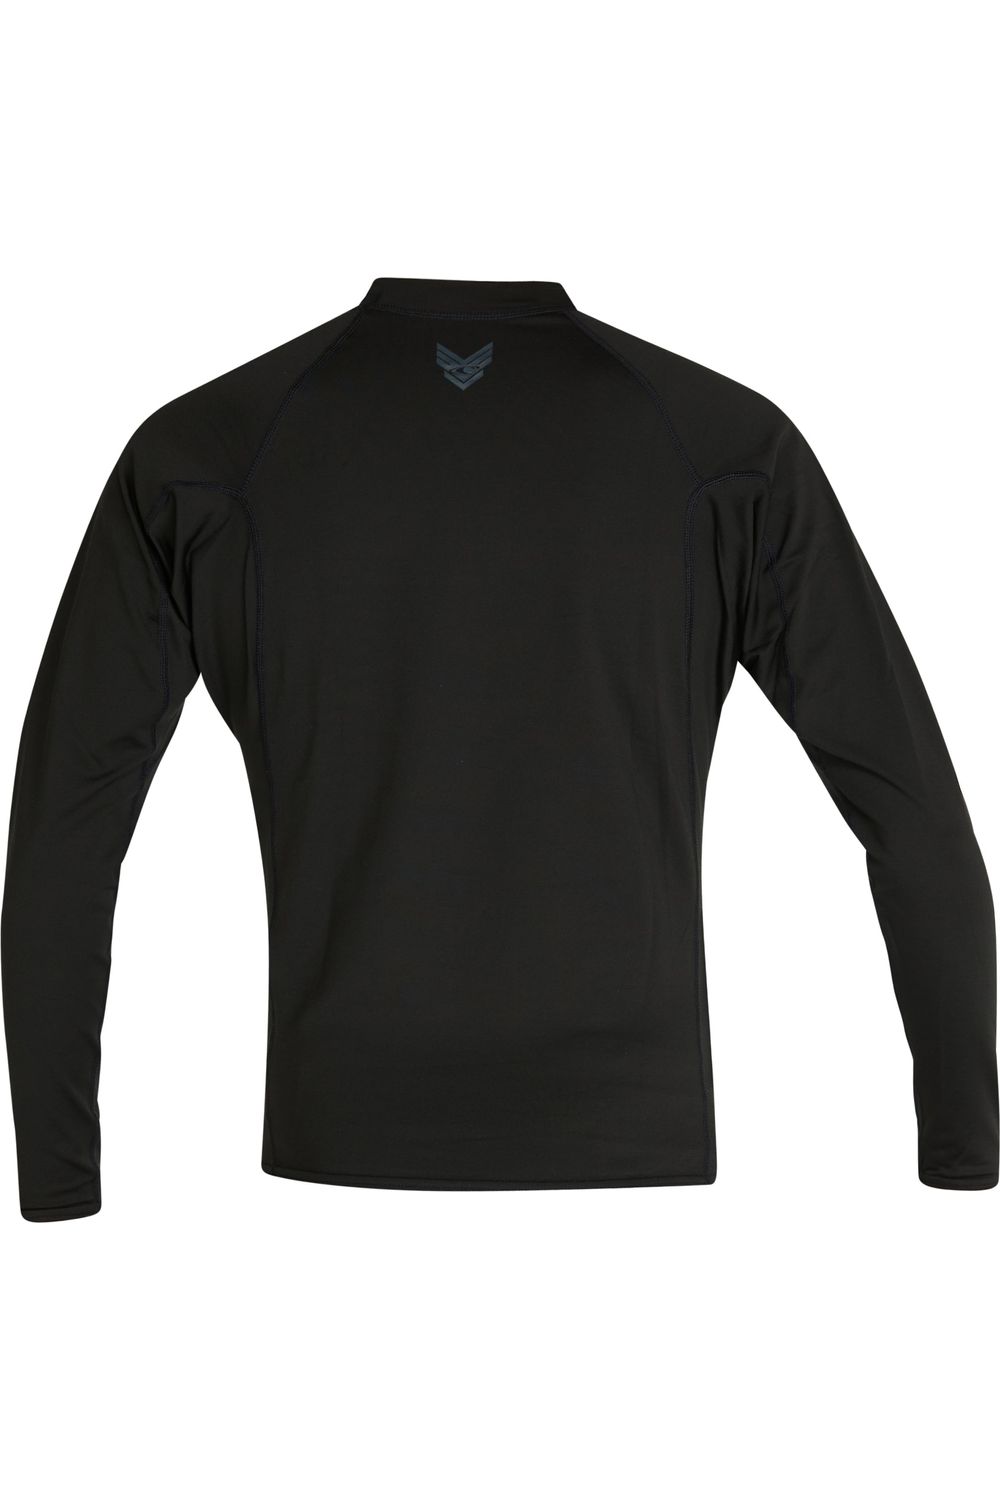 Onw Youth Thermo X L/S Top